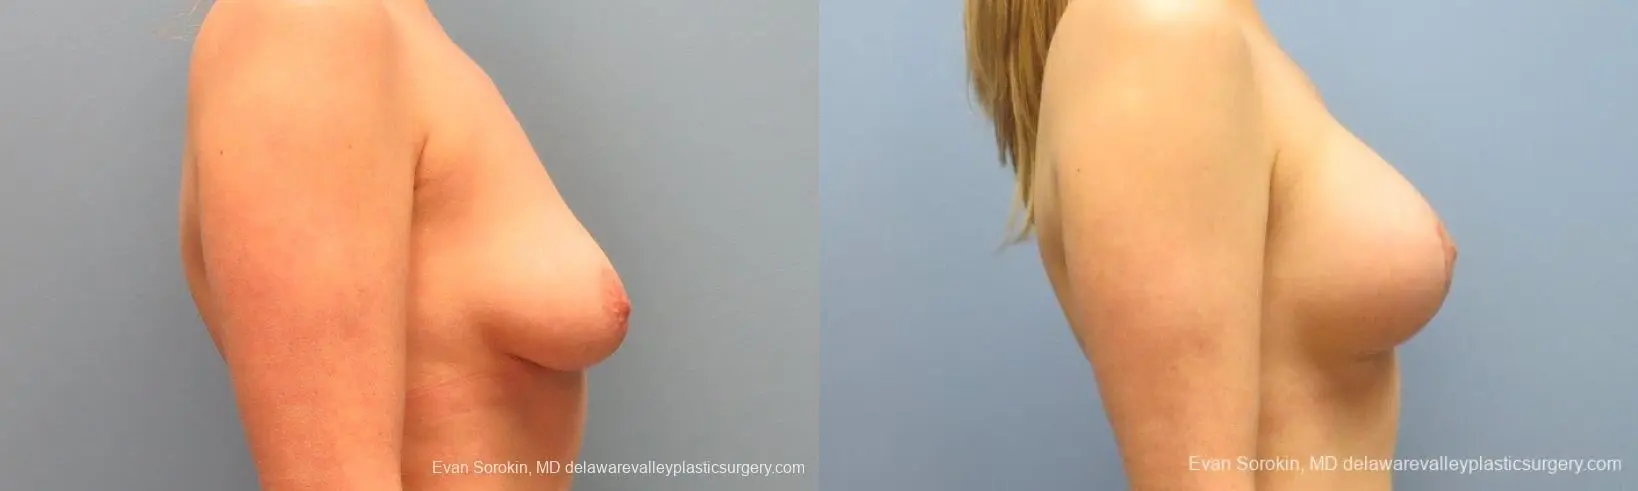 Philadelphia Breast Lift and Augmentation 10116 - Before and After 3